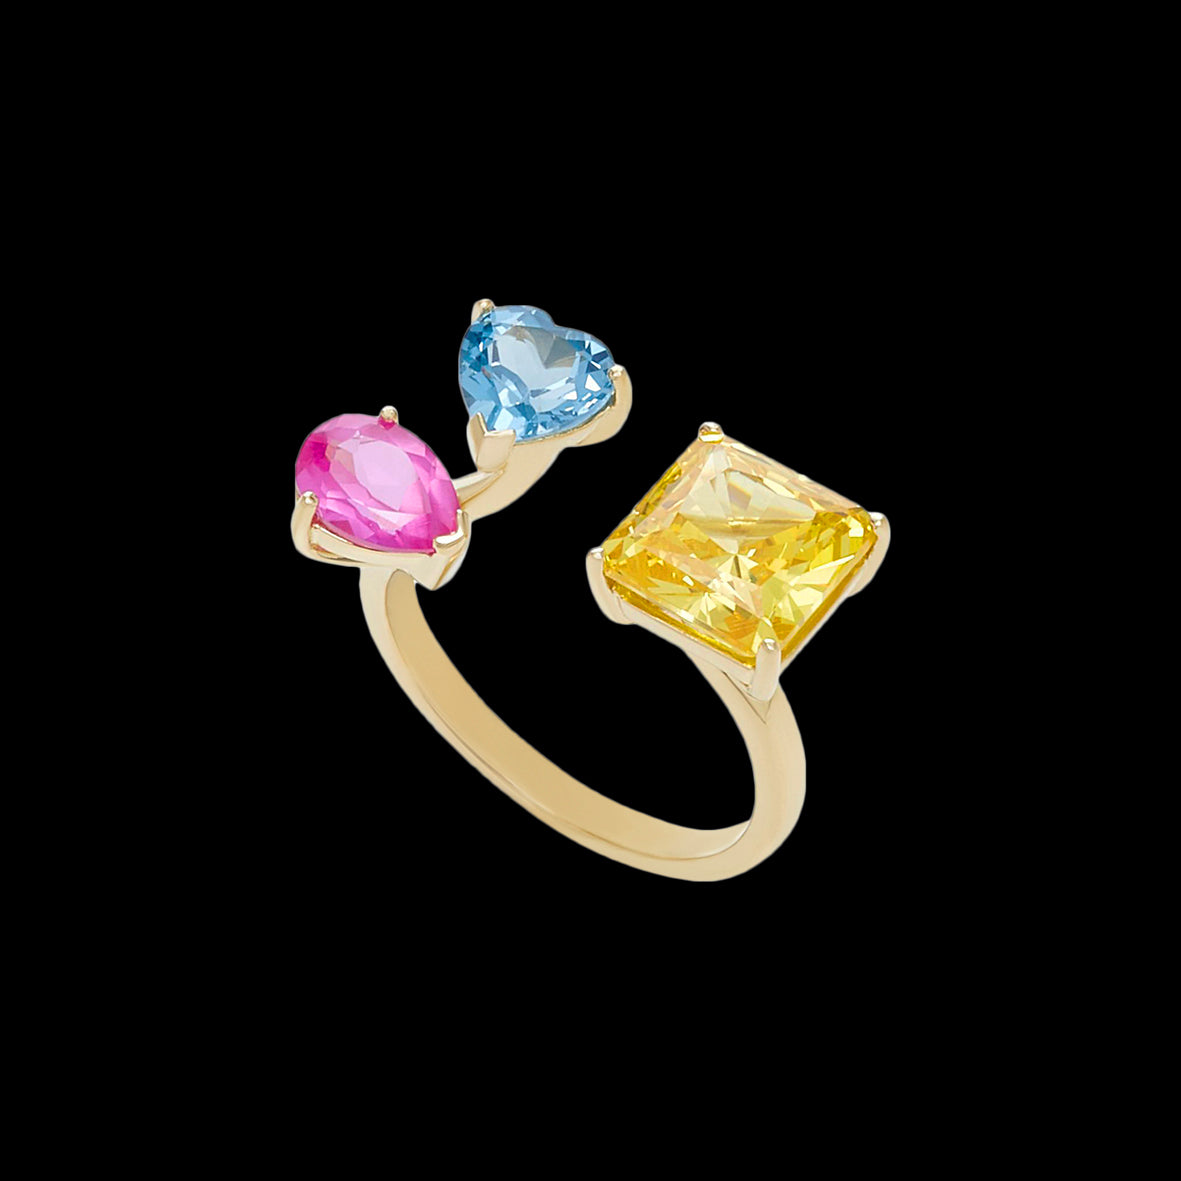 Orion Canary Ring, Ring, Anabela Chan Joaillerie - Fine jewelry with laboratory grown and created gemstones hand-crafted in the United Kingdom. Anabela Chan Joaillerie is the first fine jewellery brand in the world to champion laboratory-grown and created gemstones with high jewellery design, artisanal craftsmanship and a focus on ethical and sustainable innovations.